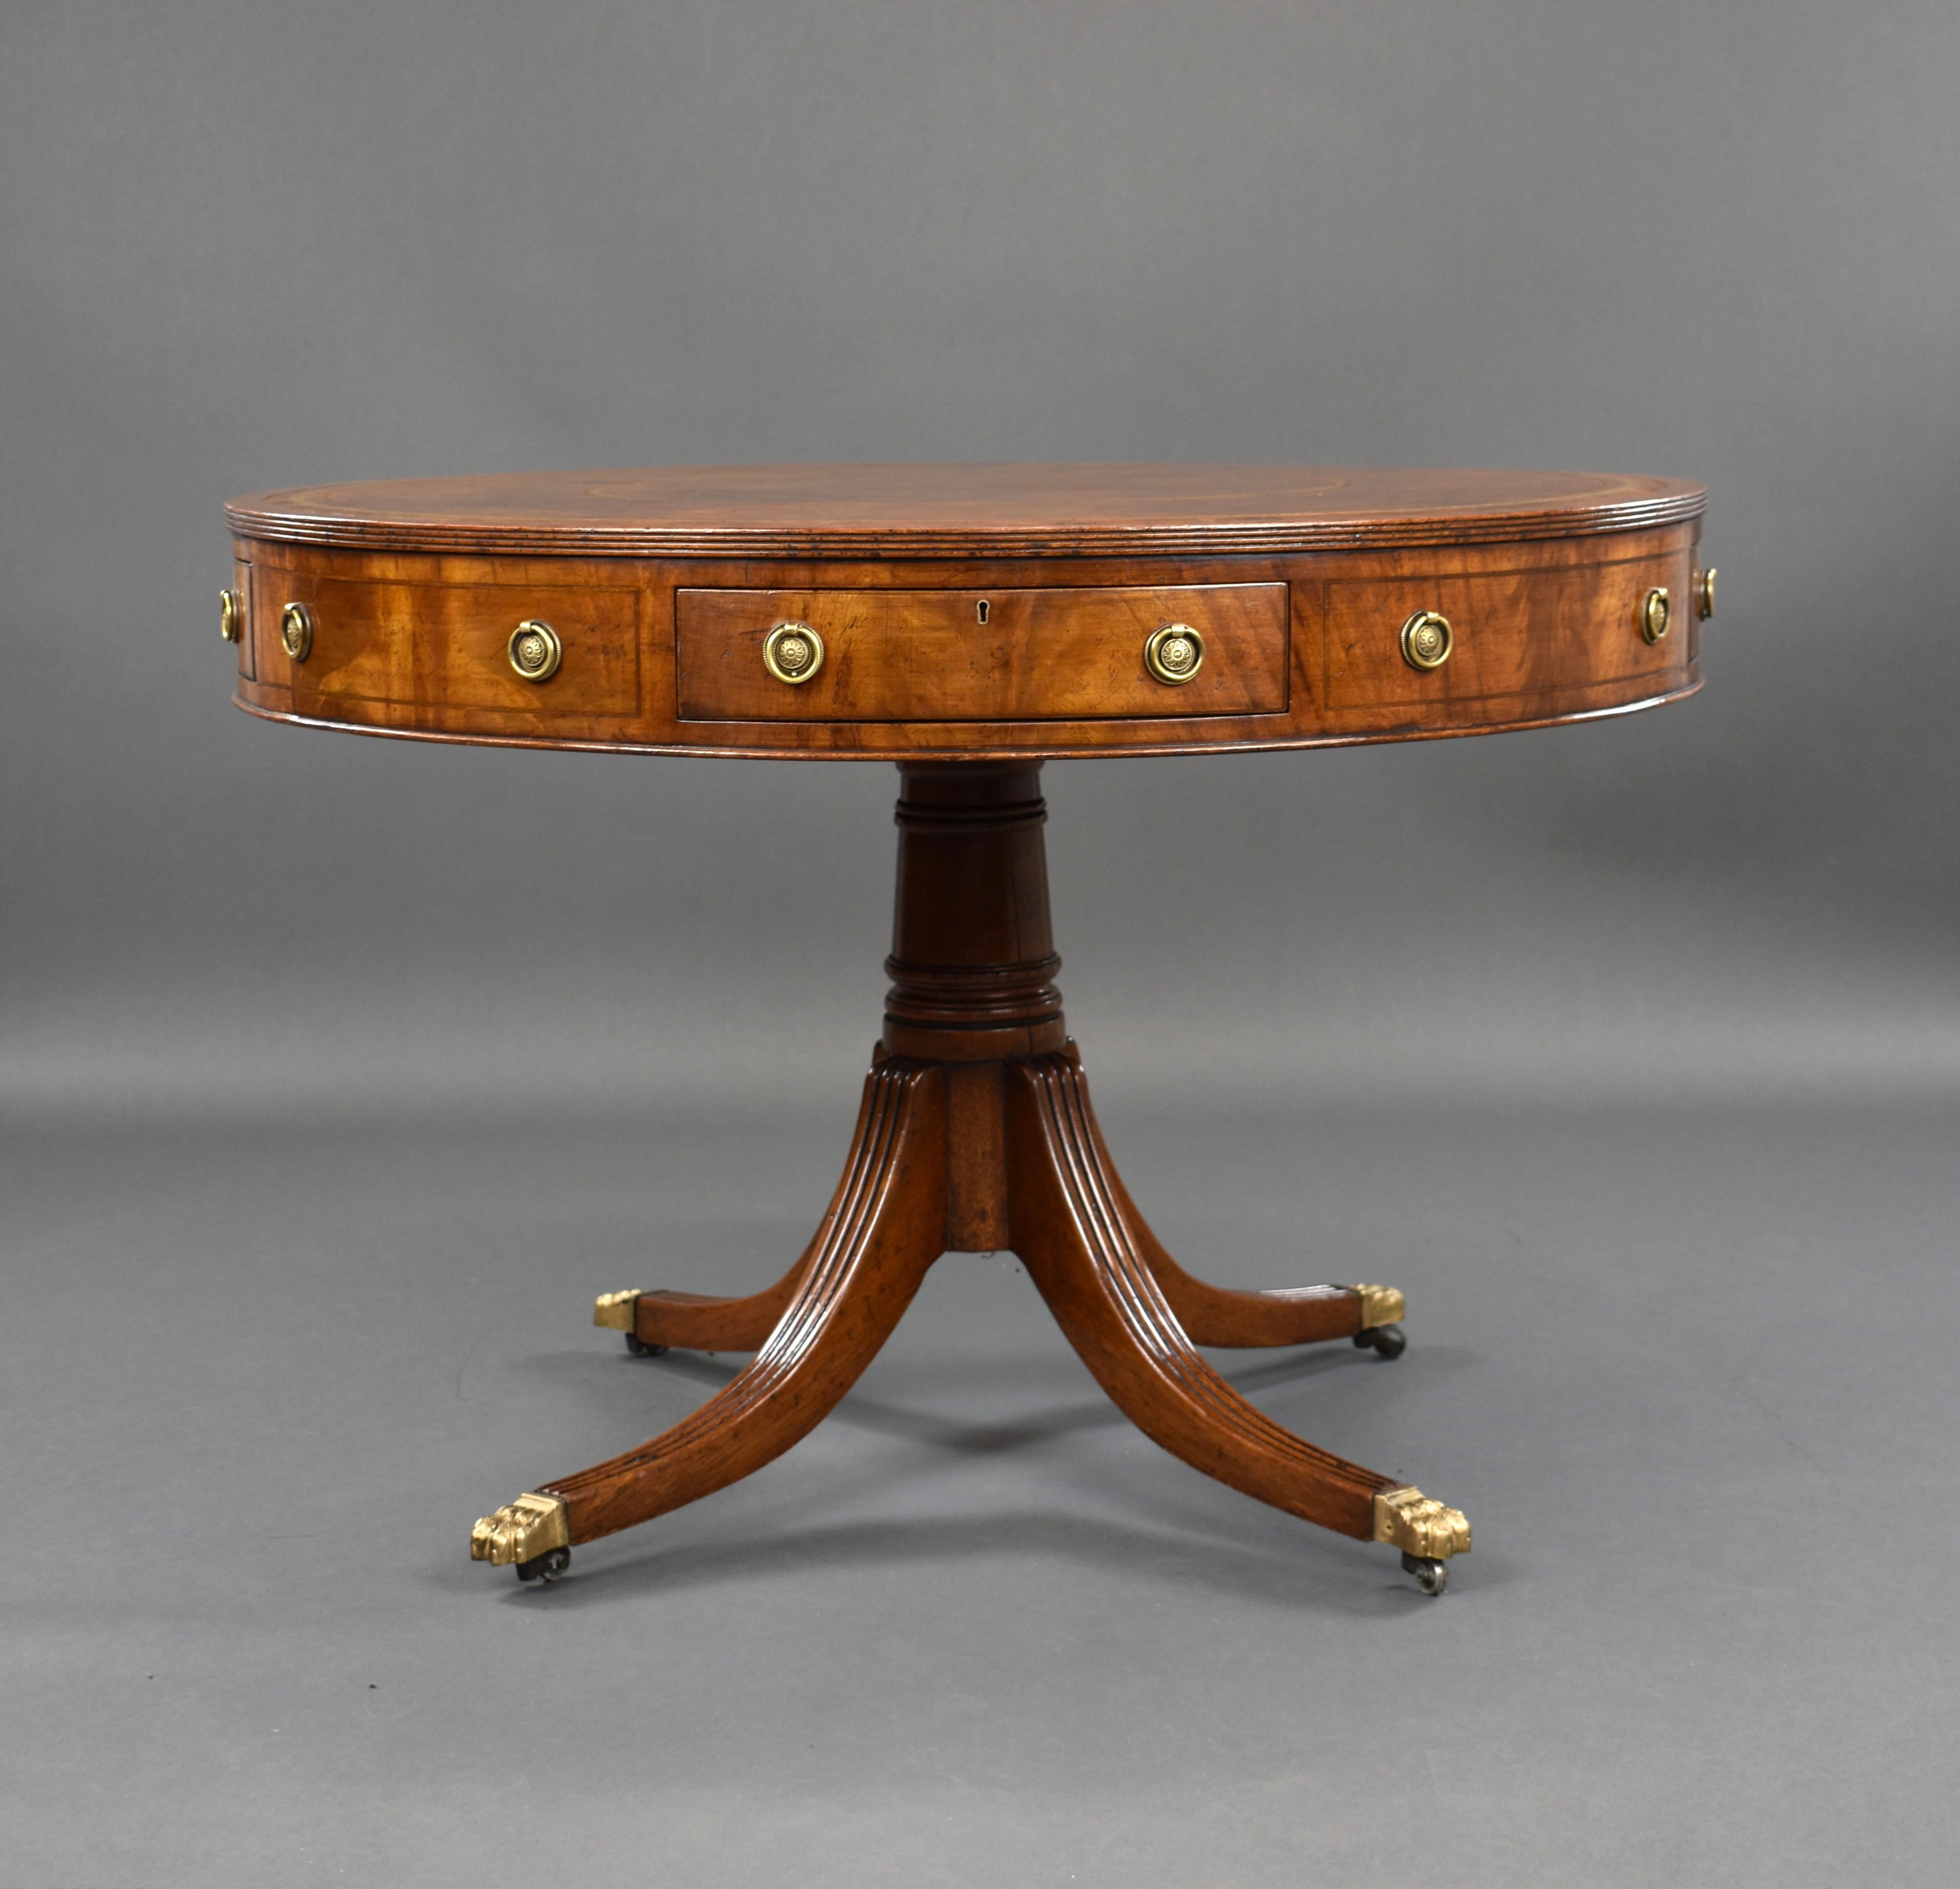 For sale is a good quality Edwardian mahogany drum table, having a leather lined top, above four drawers and four dummy drawers, with a turned stem below standing on four fluted legs raised on brass castors. The table is in very good condition for